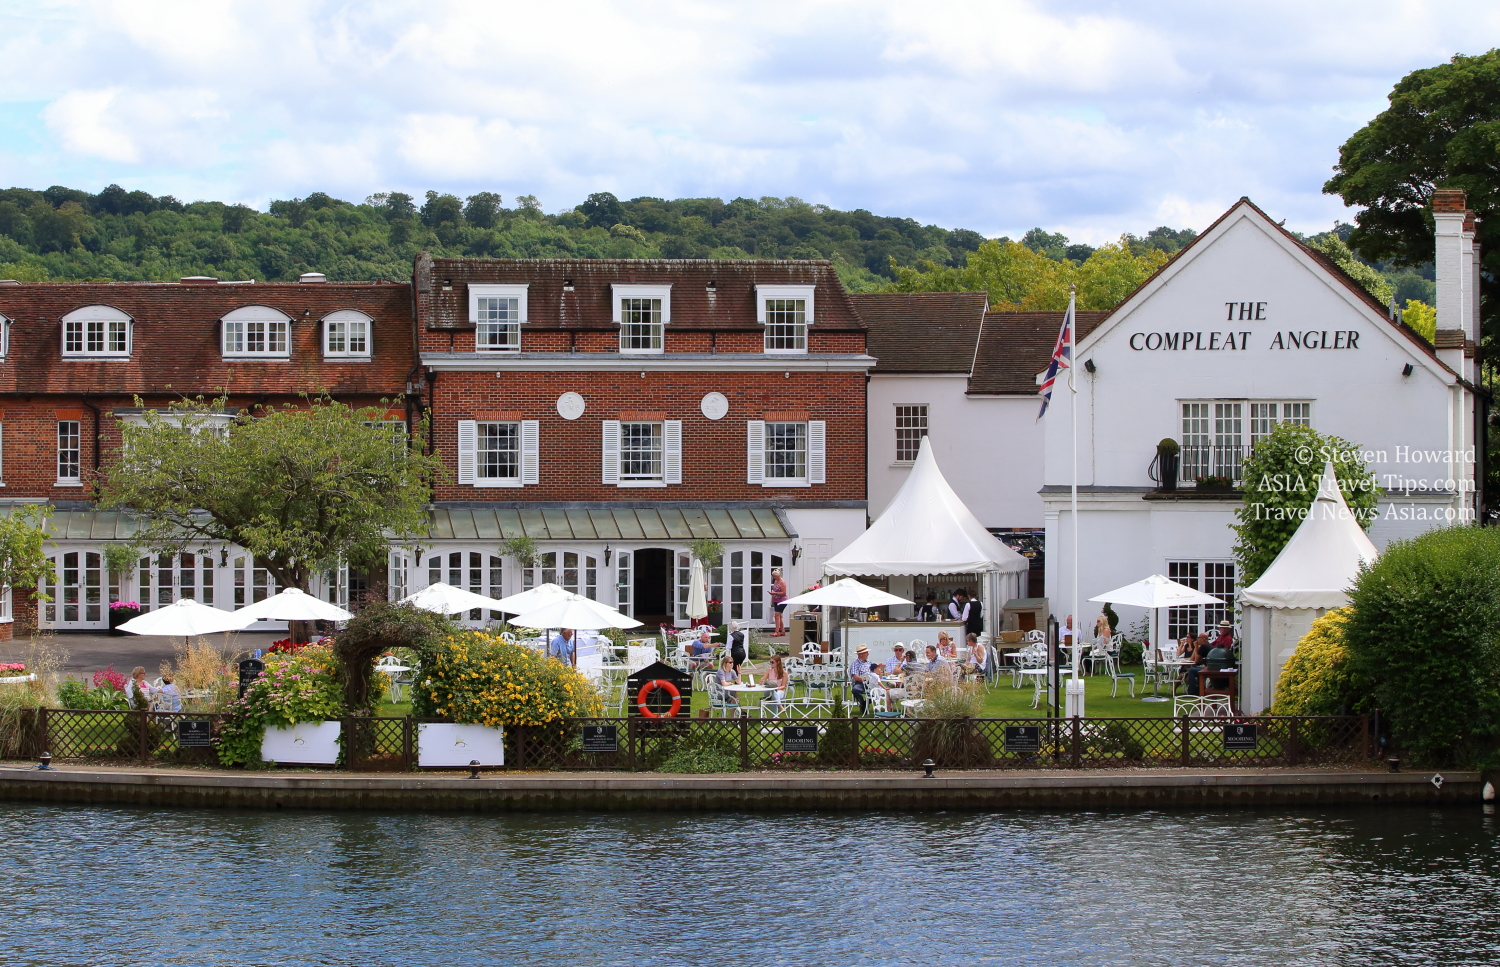 The Compleat Angler in Marlow, England. Picture by Steven Howard of TravelNewsAsia.com. Click to enlarge.